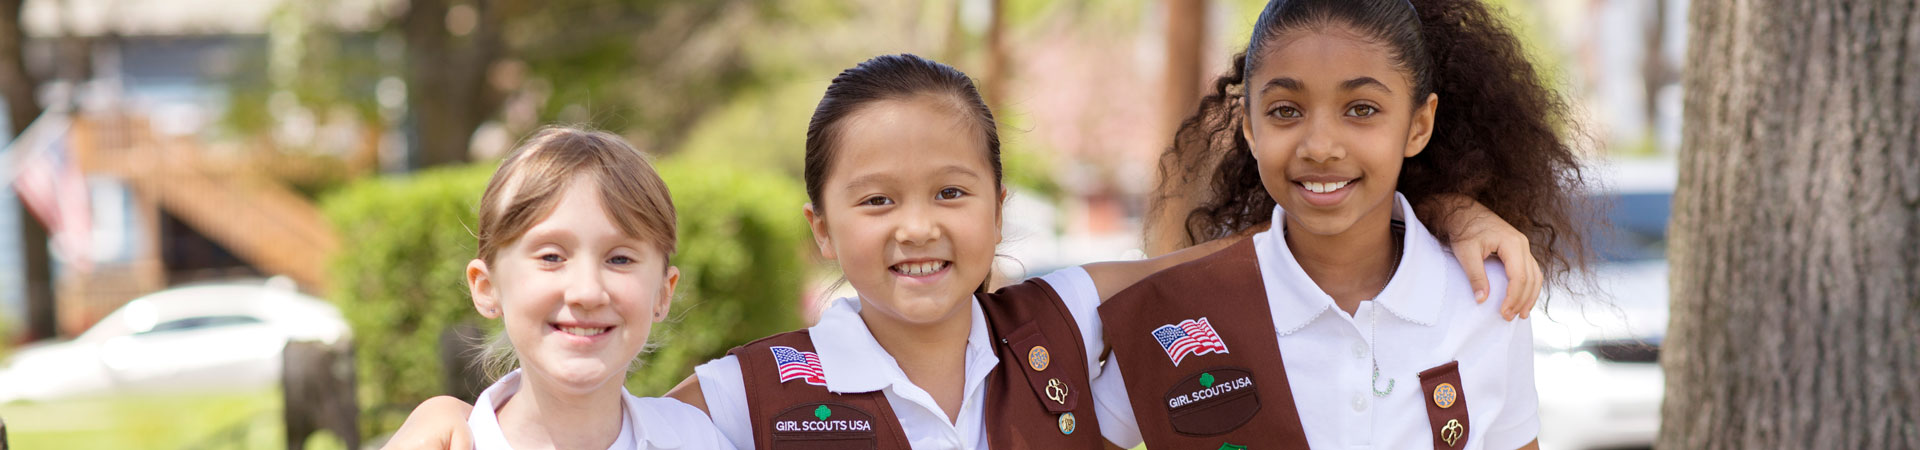  Three Brownies wearing brown vests and sashes stand arms around each other smiling outside on a sidewalk. 